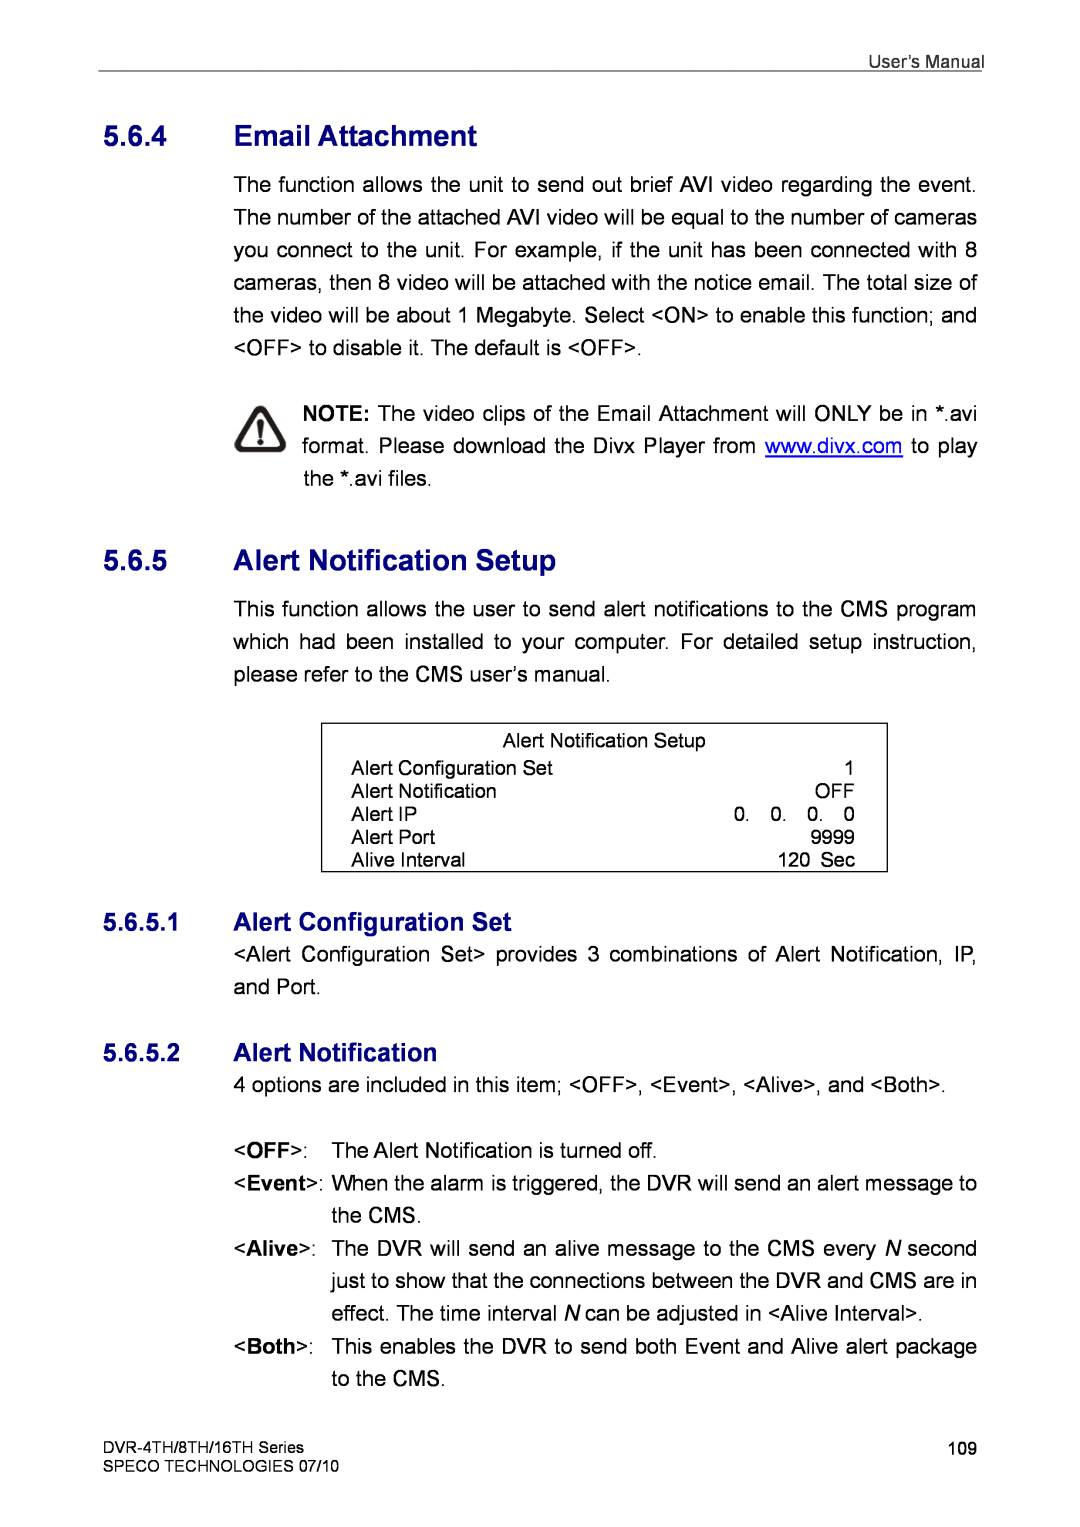 Speco Technologies 16TH, 8TH, 4TH user manual Email Attachment, Alert Notification Setup, Alert Configuration Set 